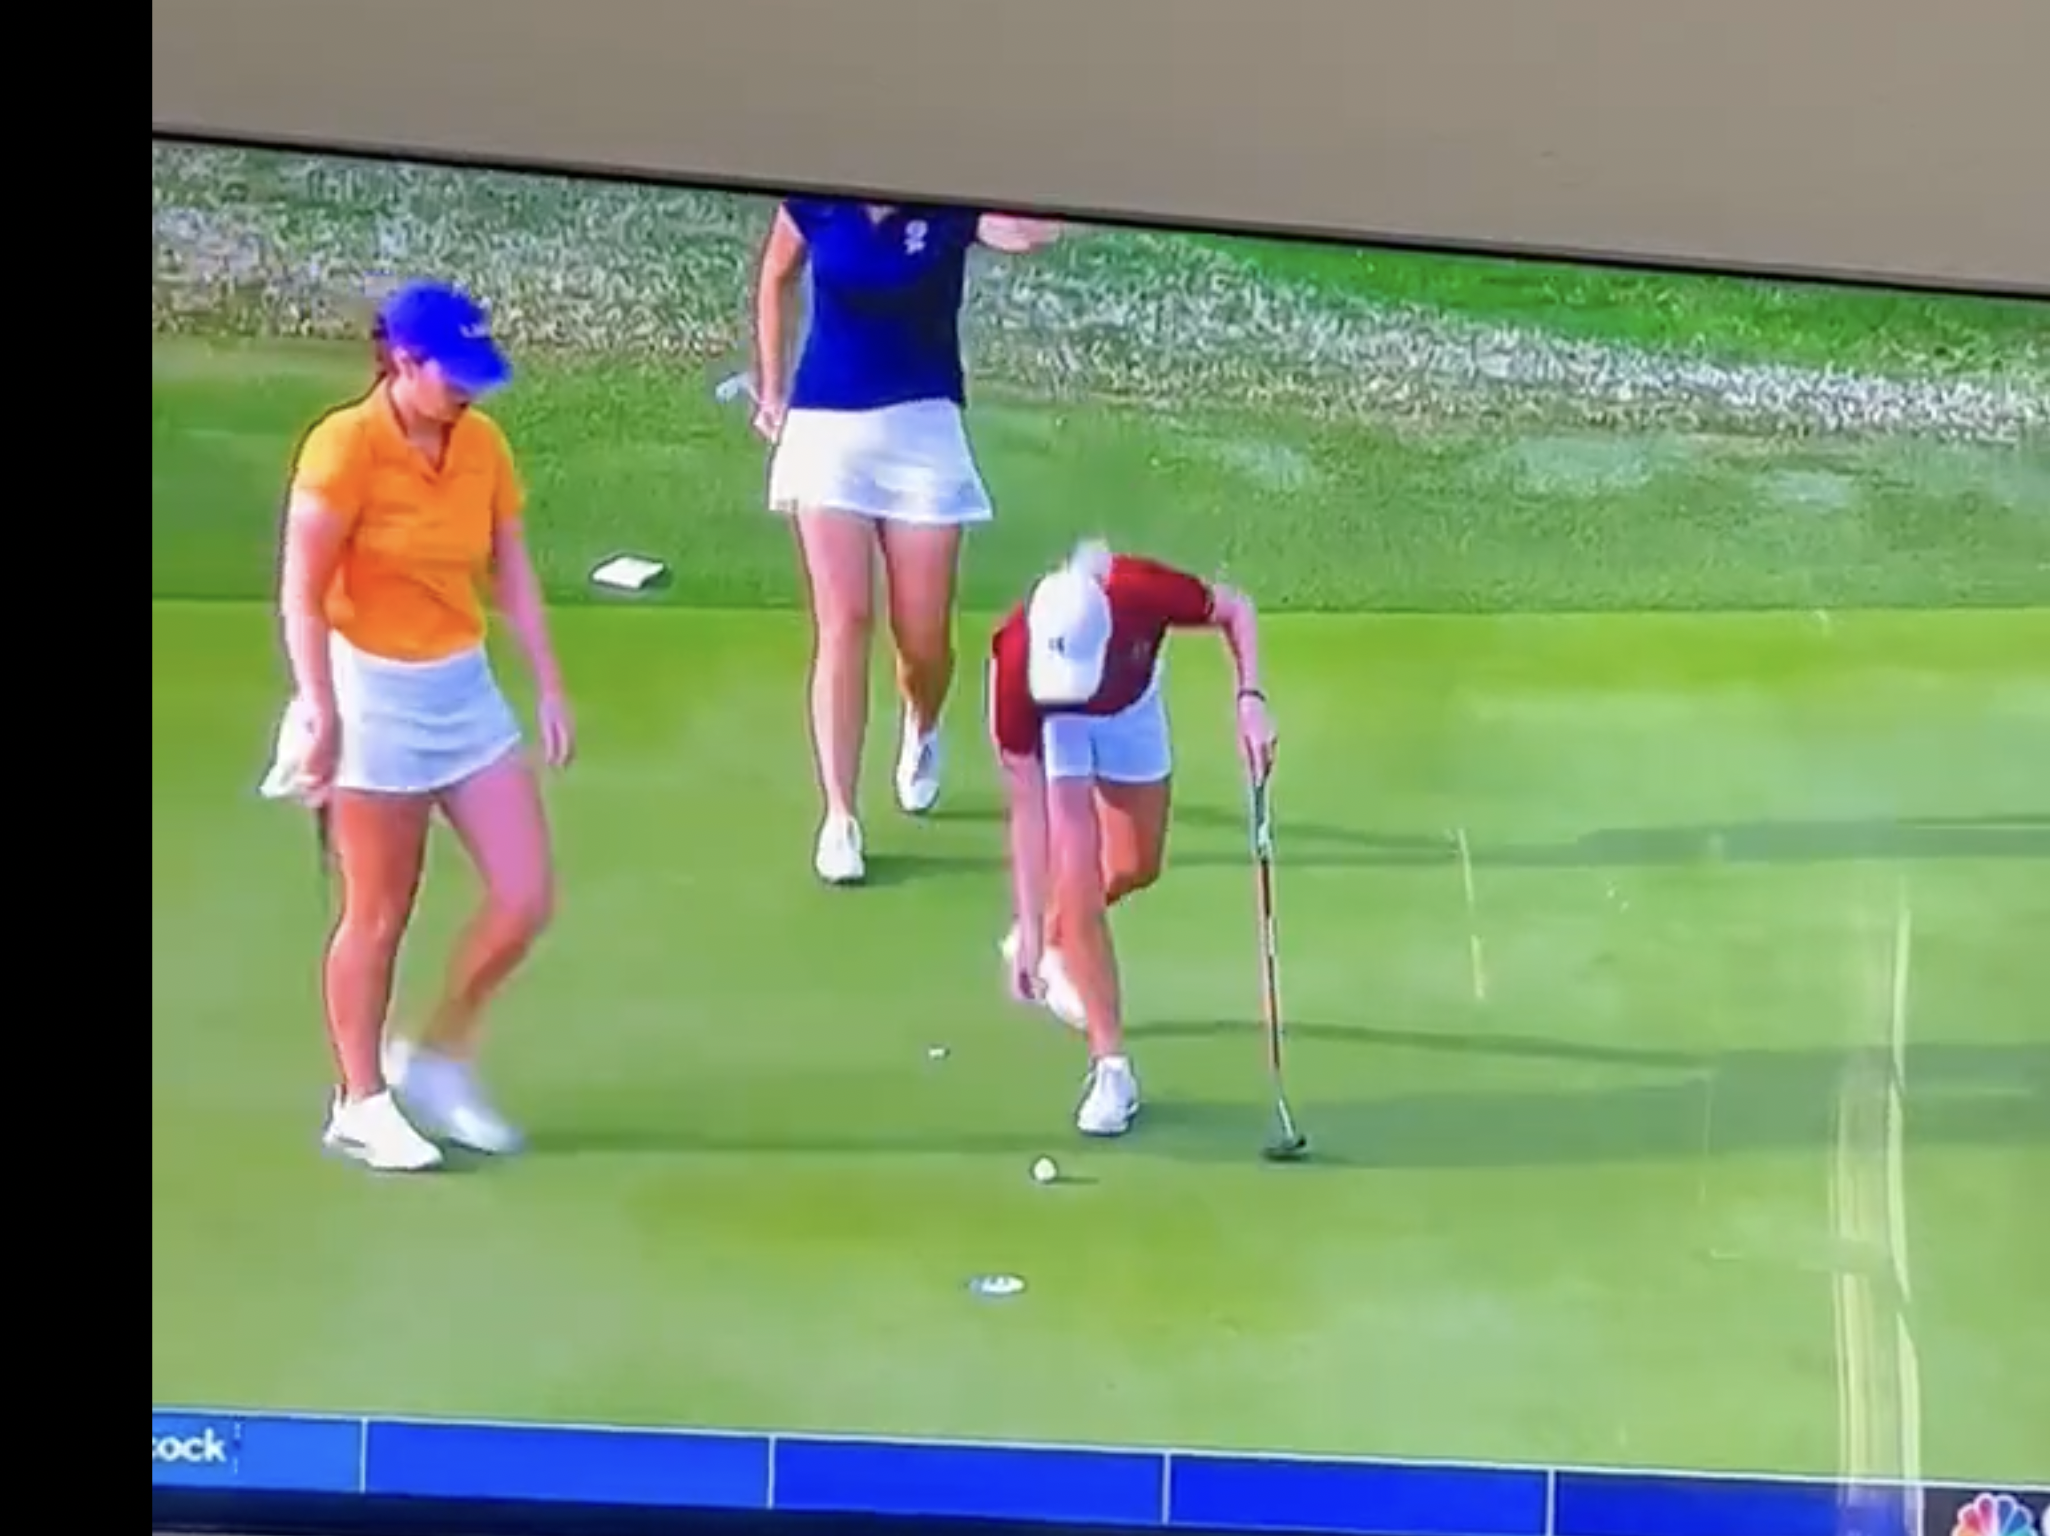 Golf world left fuming with latest show of poor etiquette at womens college event picture